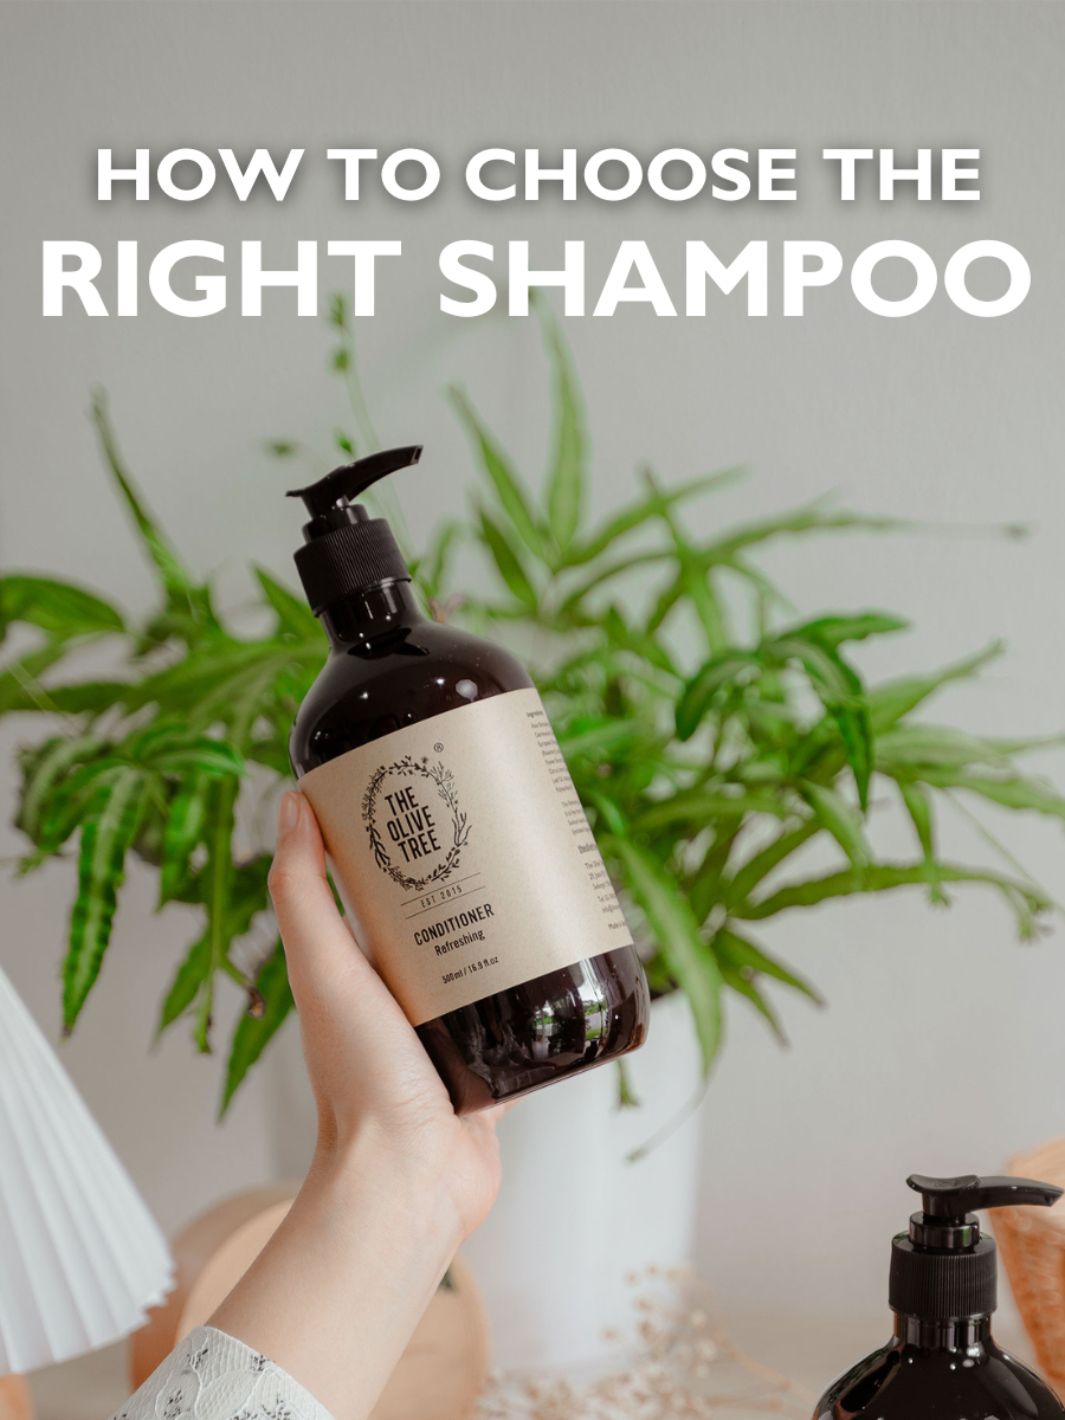 How To Choose The Right Shampoo For Your Hair Type and Scalp Condition?